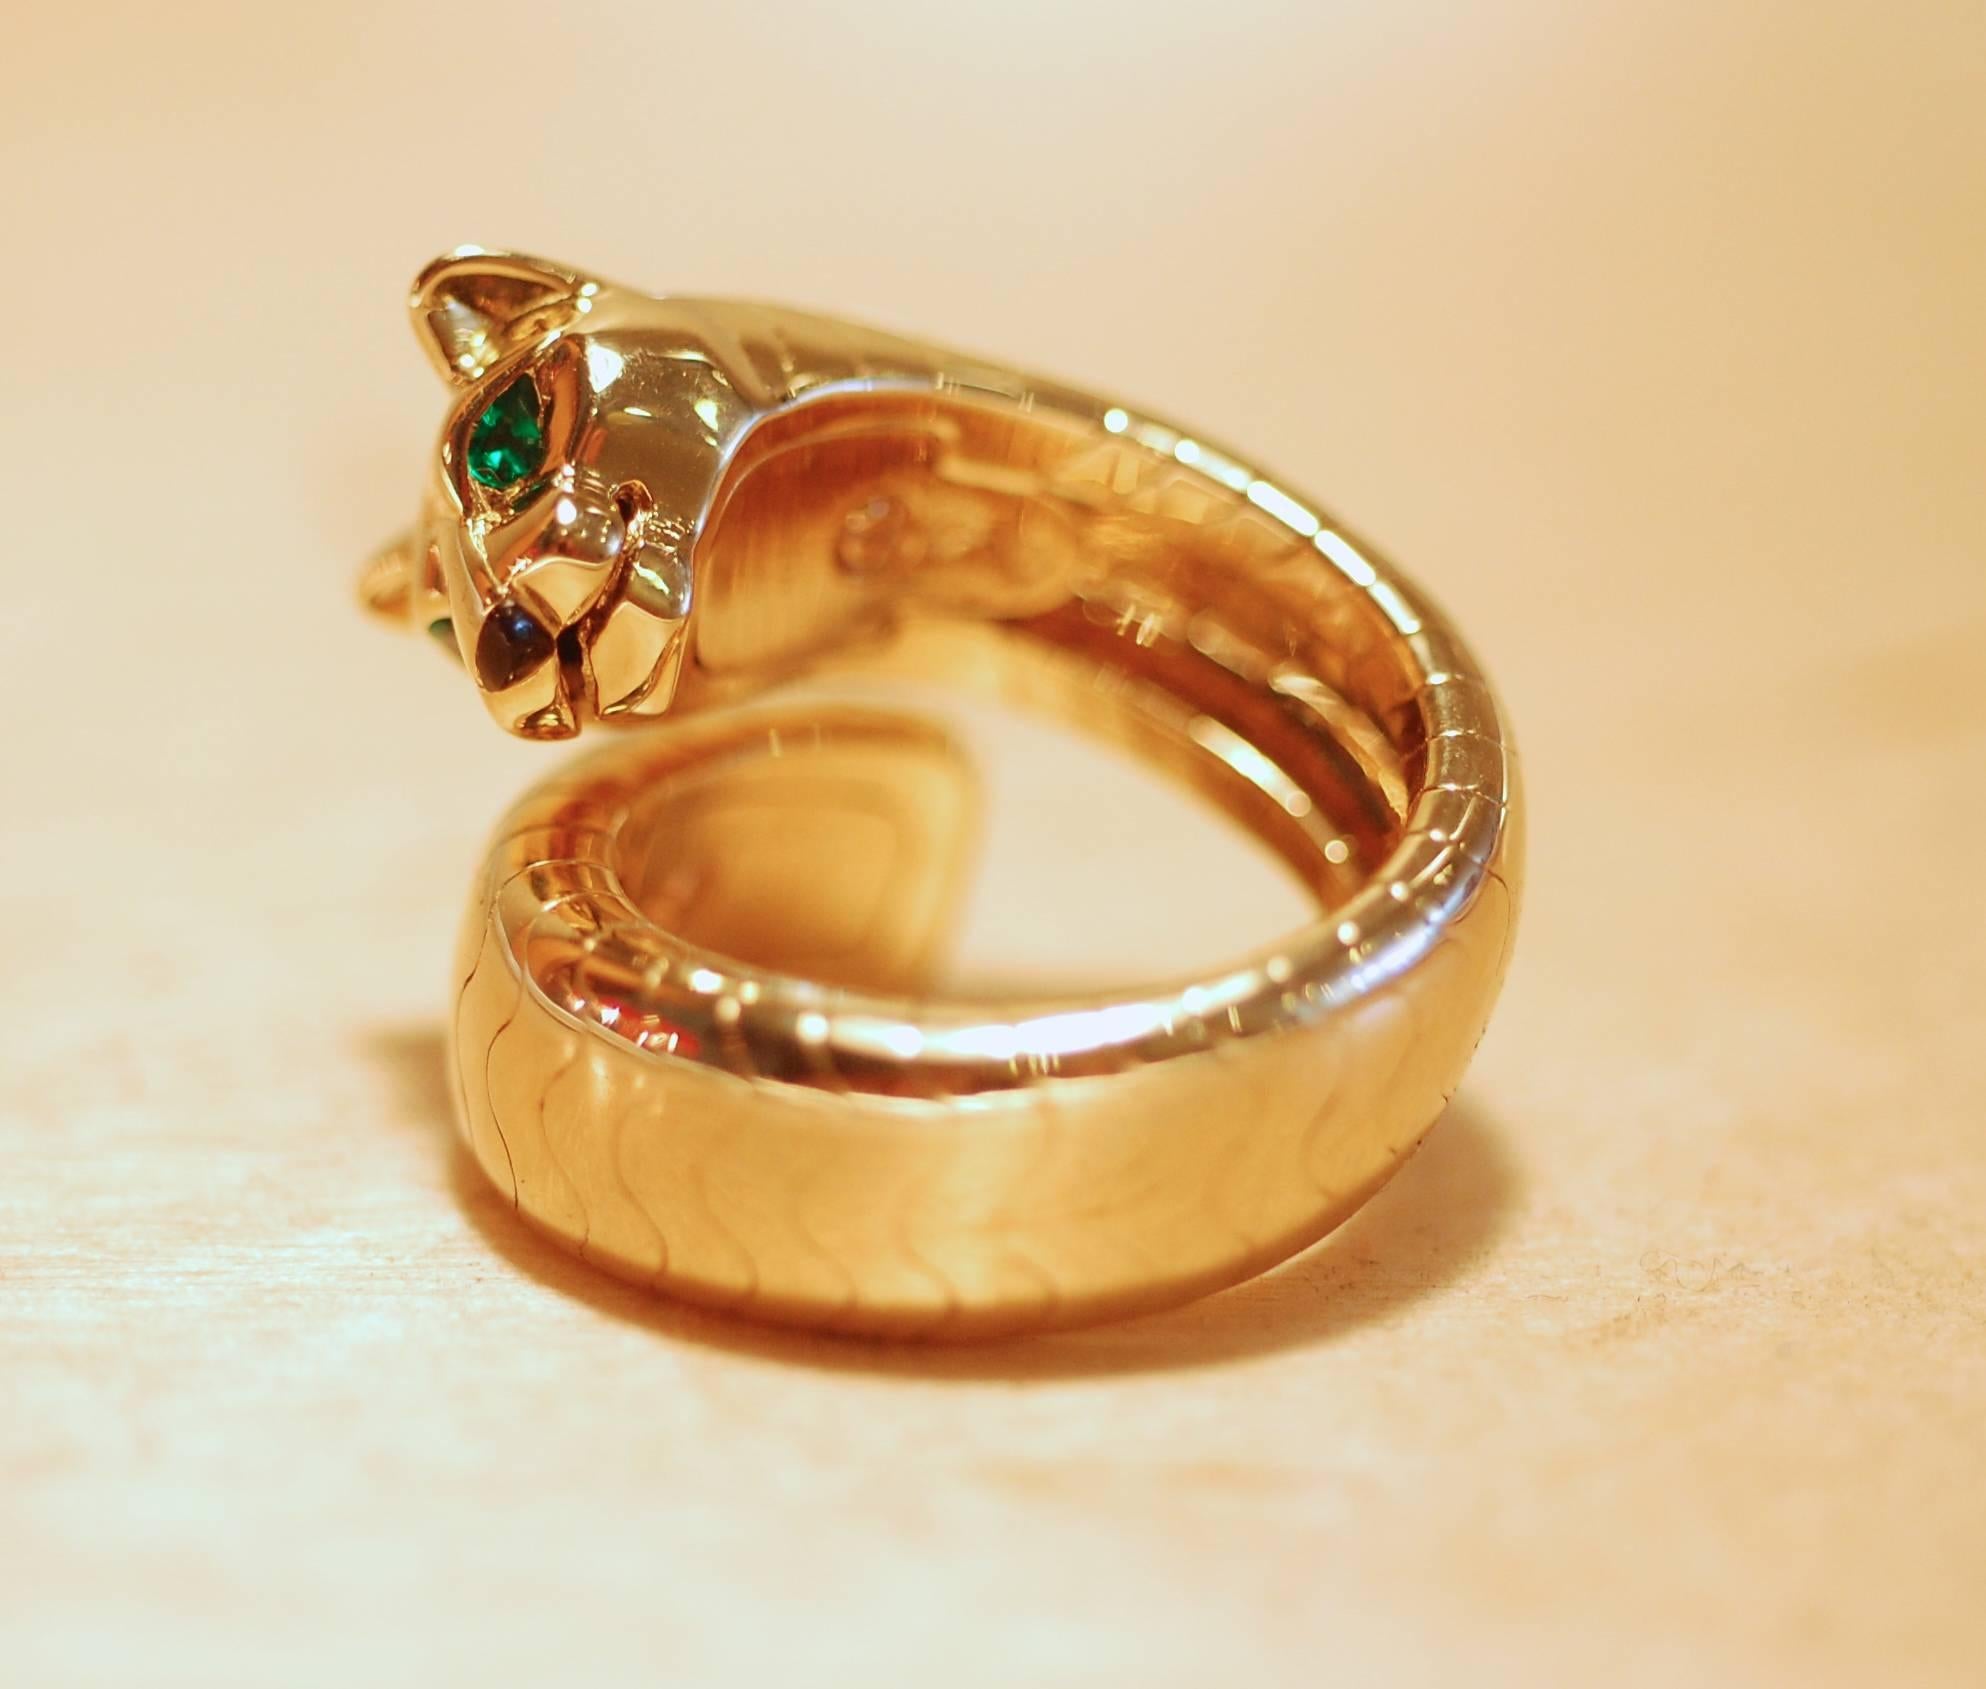 18-karat yellow gold, emerald and Onyx Panther ring by Cartier. Part of the 